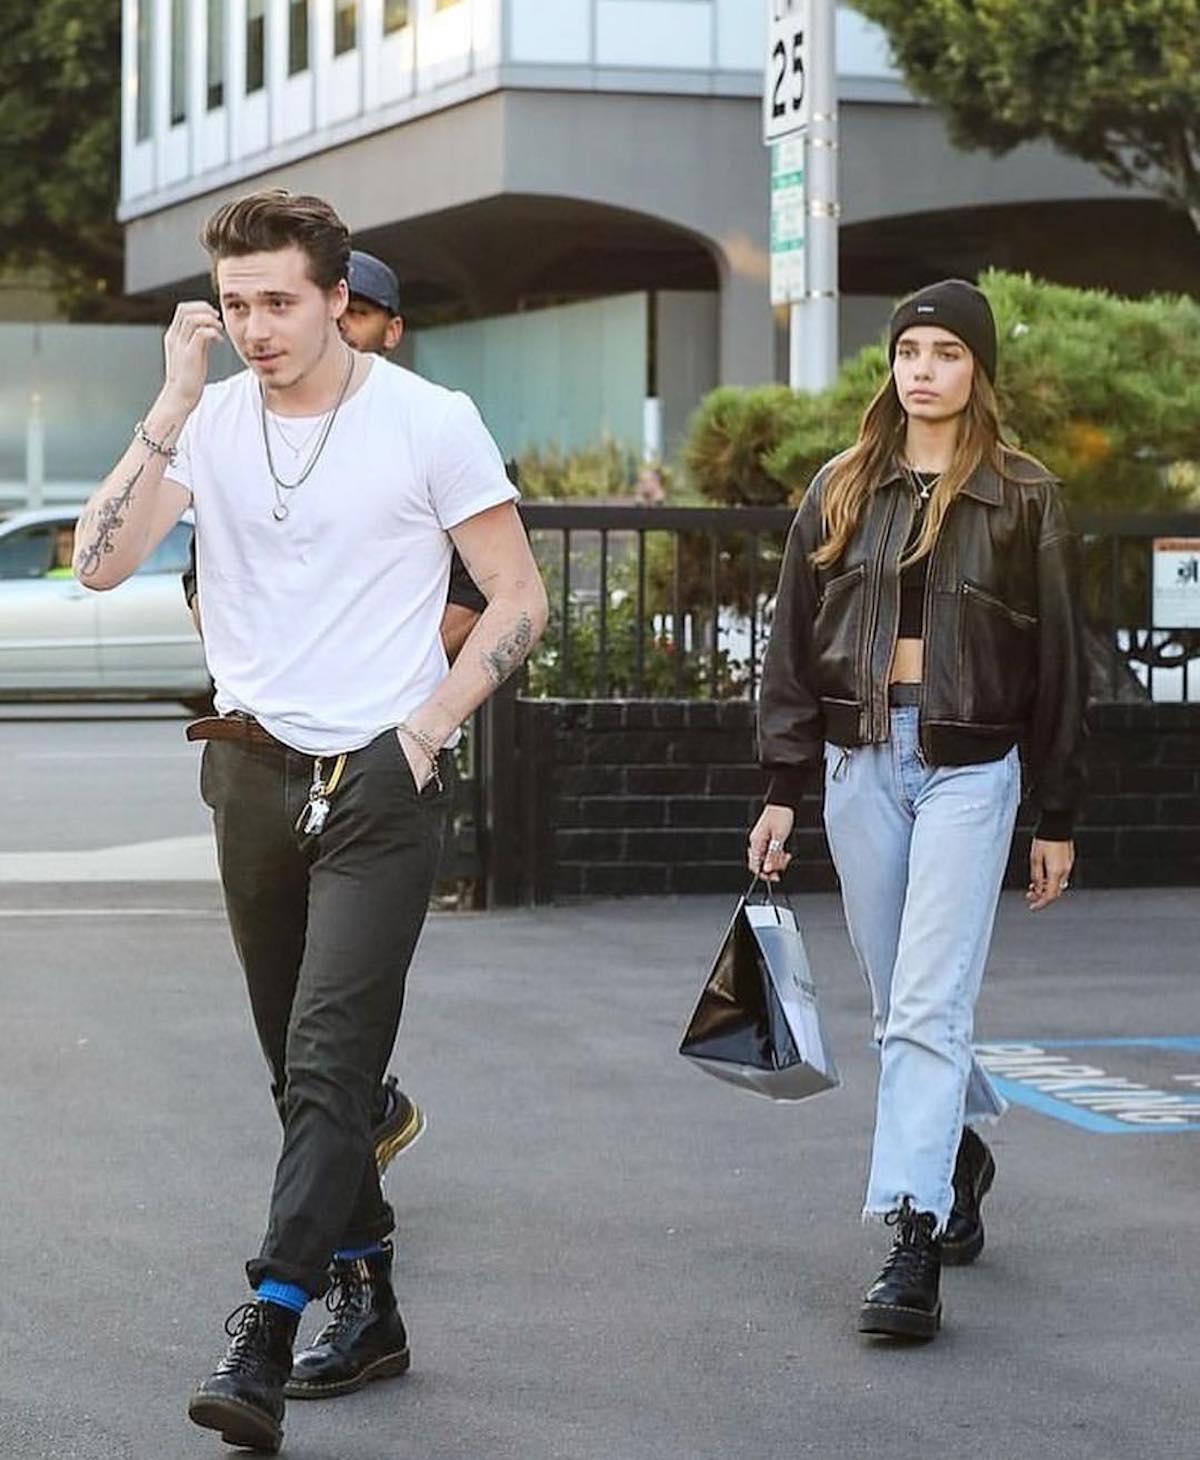 SPOTTED: Brooklyn Beckham Out & About With Girlfriend in Beverly Hills